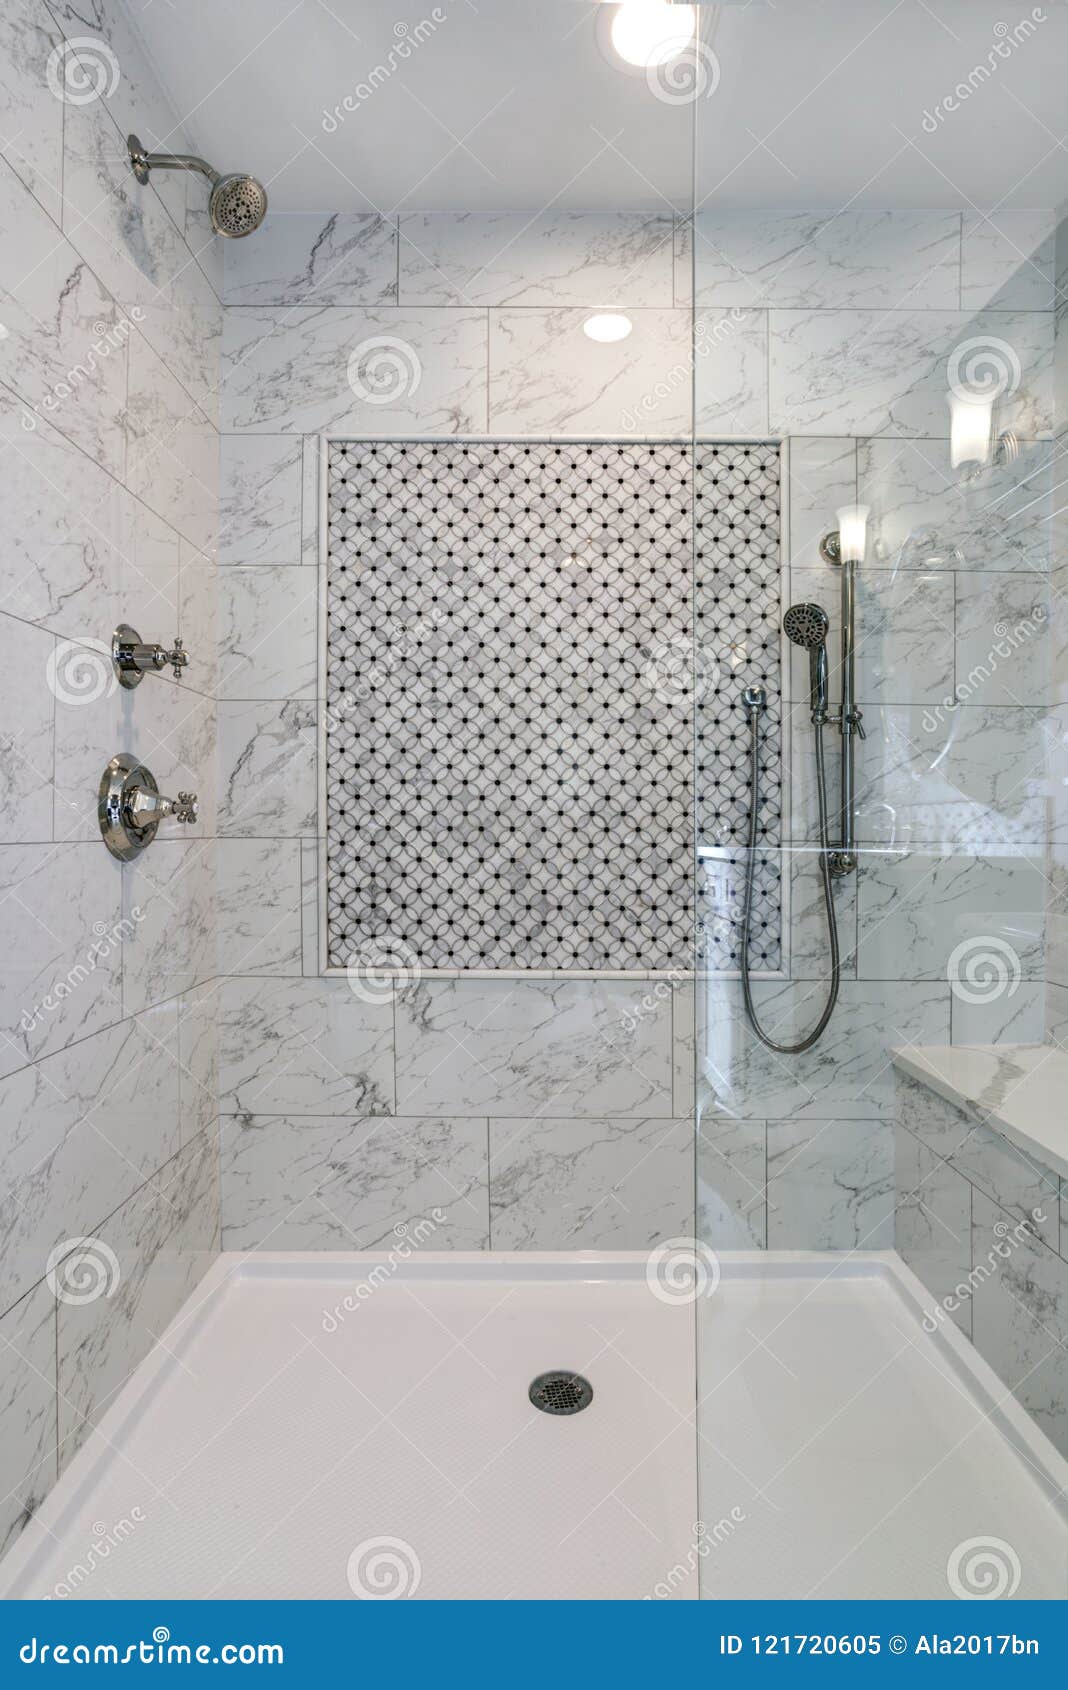 Lovely Walk-in Shower with Carrera Marble Surround Stock Image - Image of  real, project: 121720605